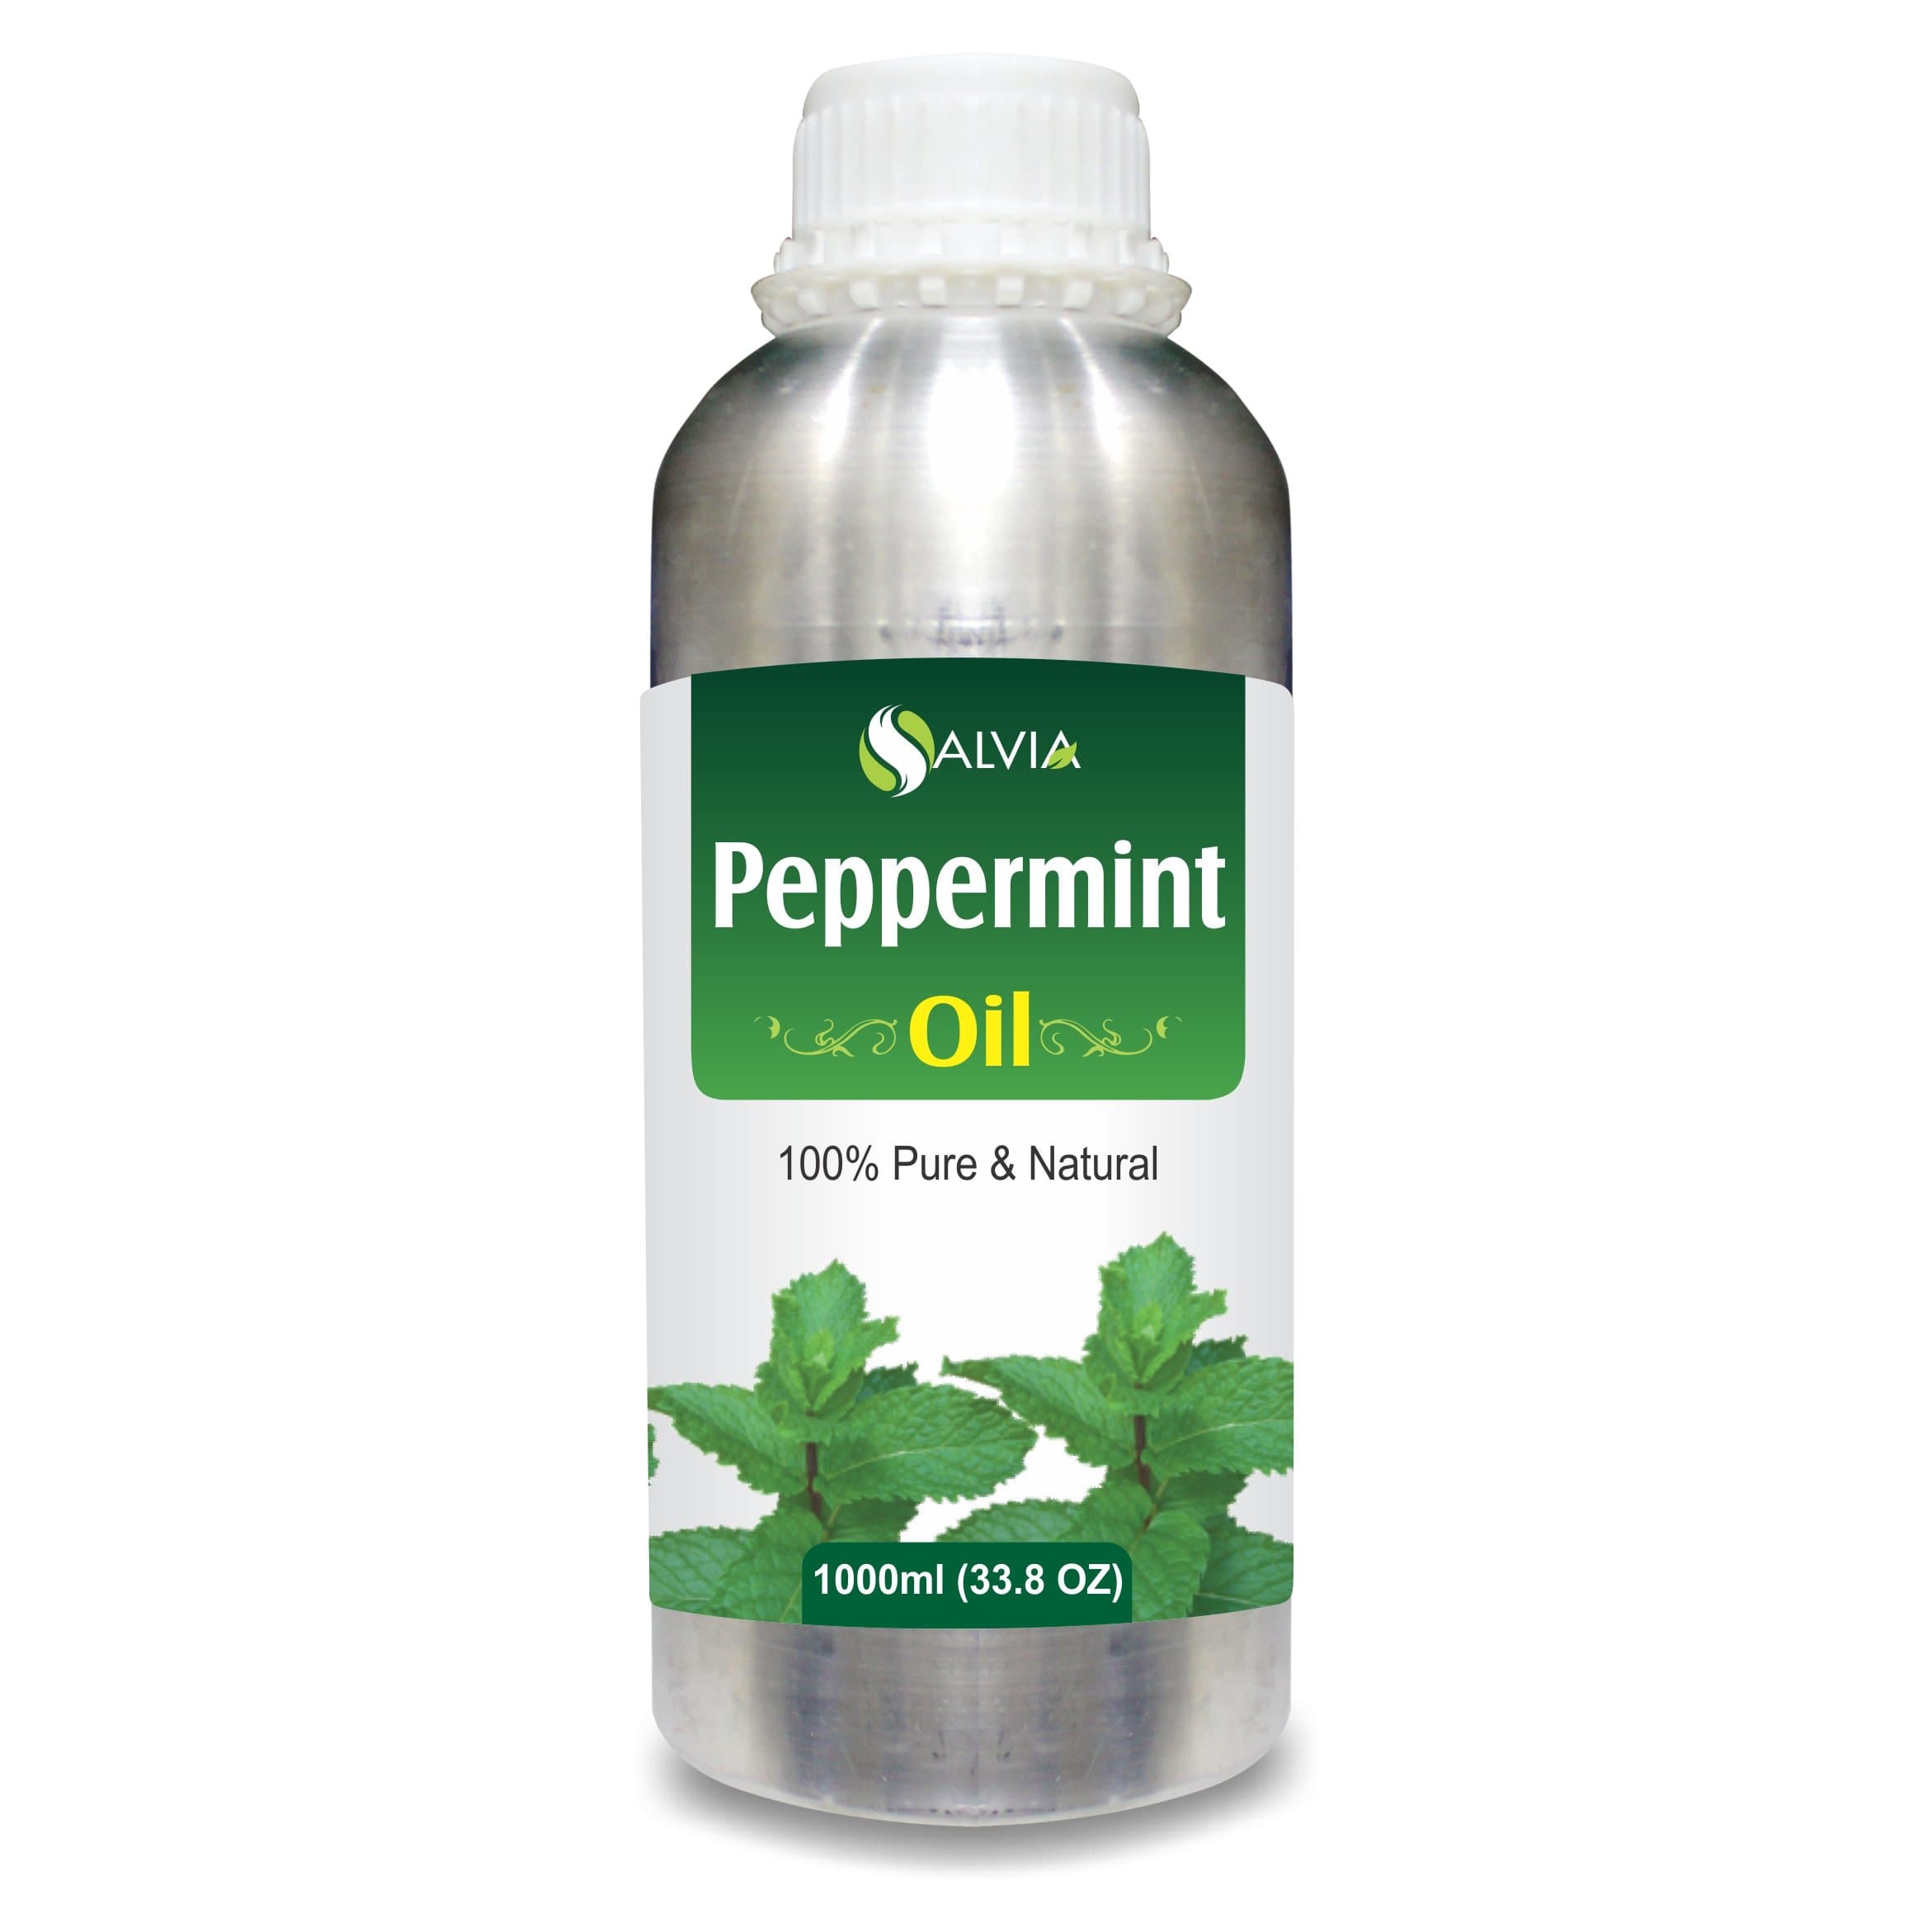 peppermint oil benefits for skin